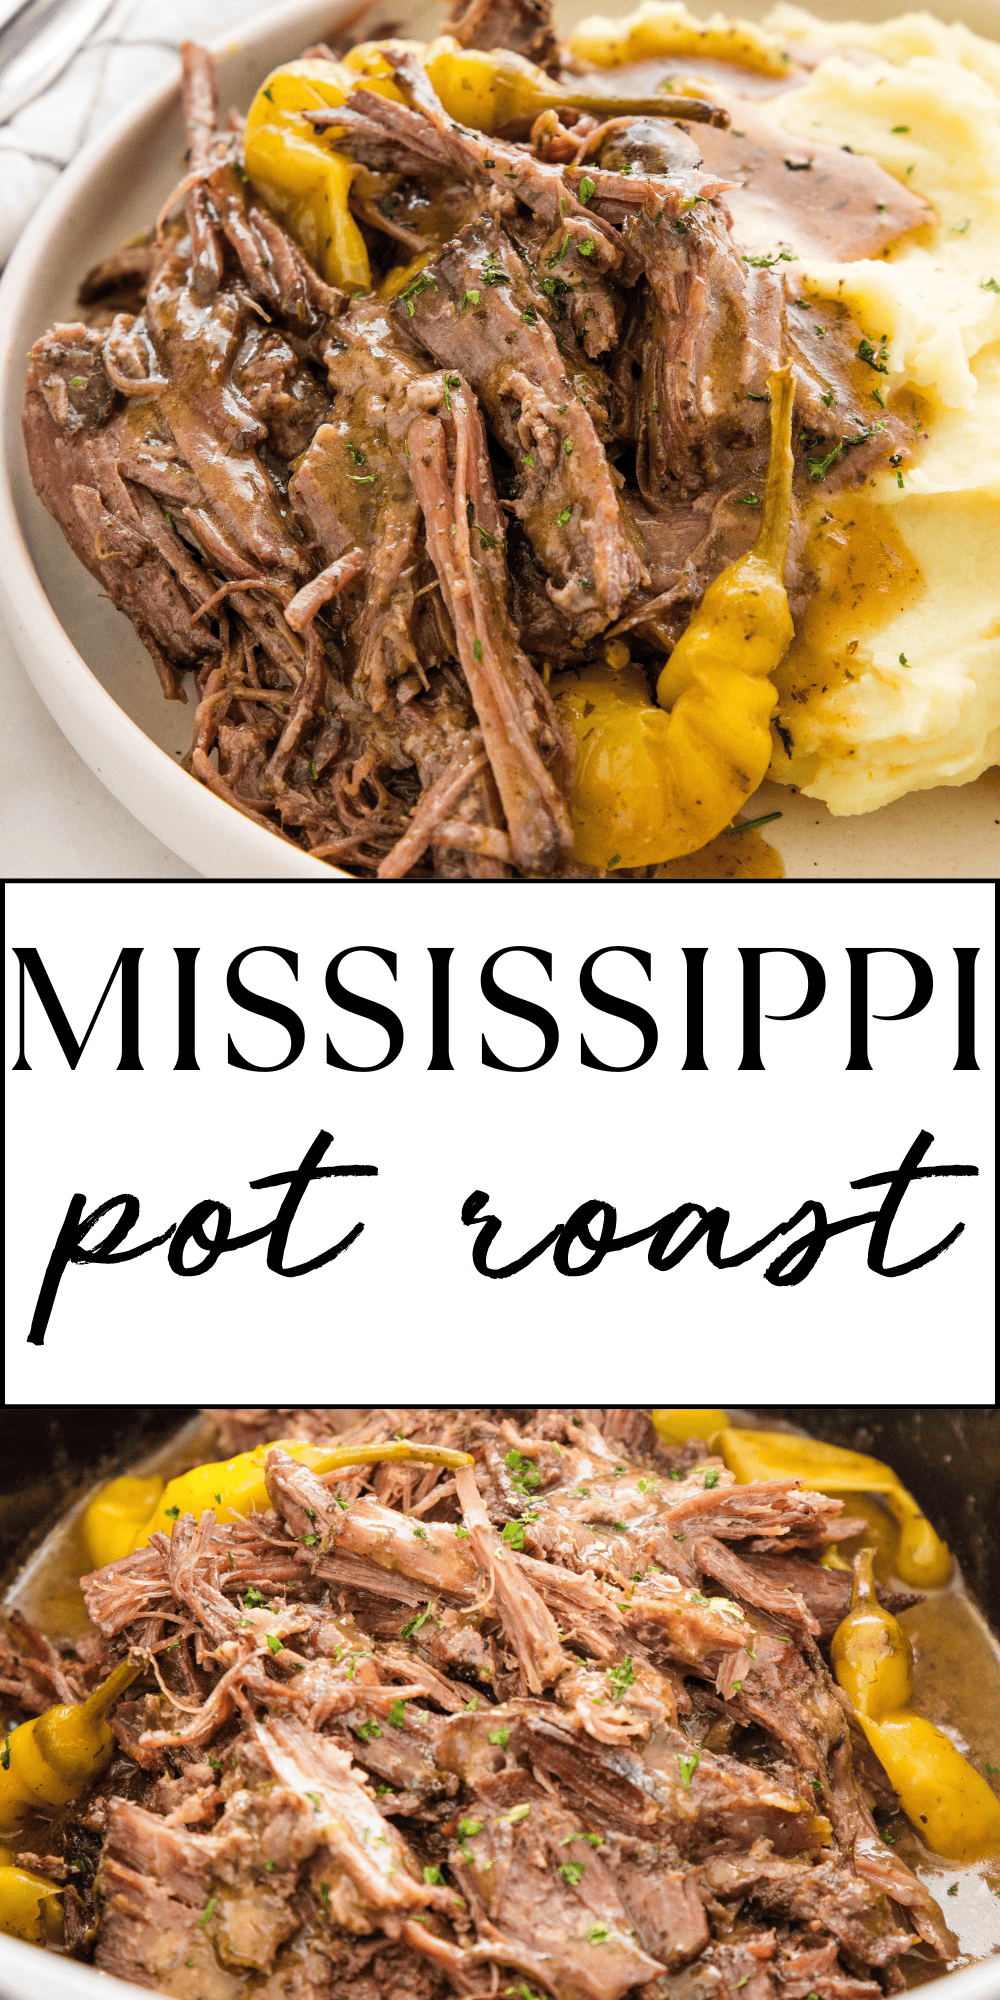 This Mississippi Pot Roast recipe is the BEST pot roast you'll ever try! It's so juicy and flavourful with a savoury gravy. It's easy to make from scratch with real ingredients - no preservatives, no gravy or seasoning packets, just tender, slow-cooked beef made in the crock pot, the Instant Pot or in the oven. Recipe from thebusybaker.ca! #potroast #mississippipotroast #mississippiroast #mississippipotroastrecipe #potroastrecipe #instantpotmississippipotroast #crockpotmississippipotroast via @busybakerblog